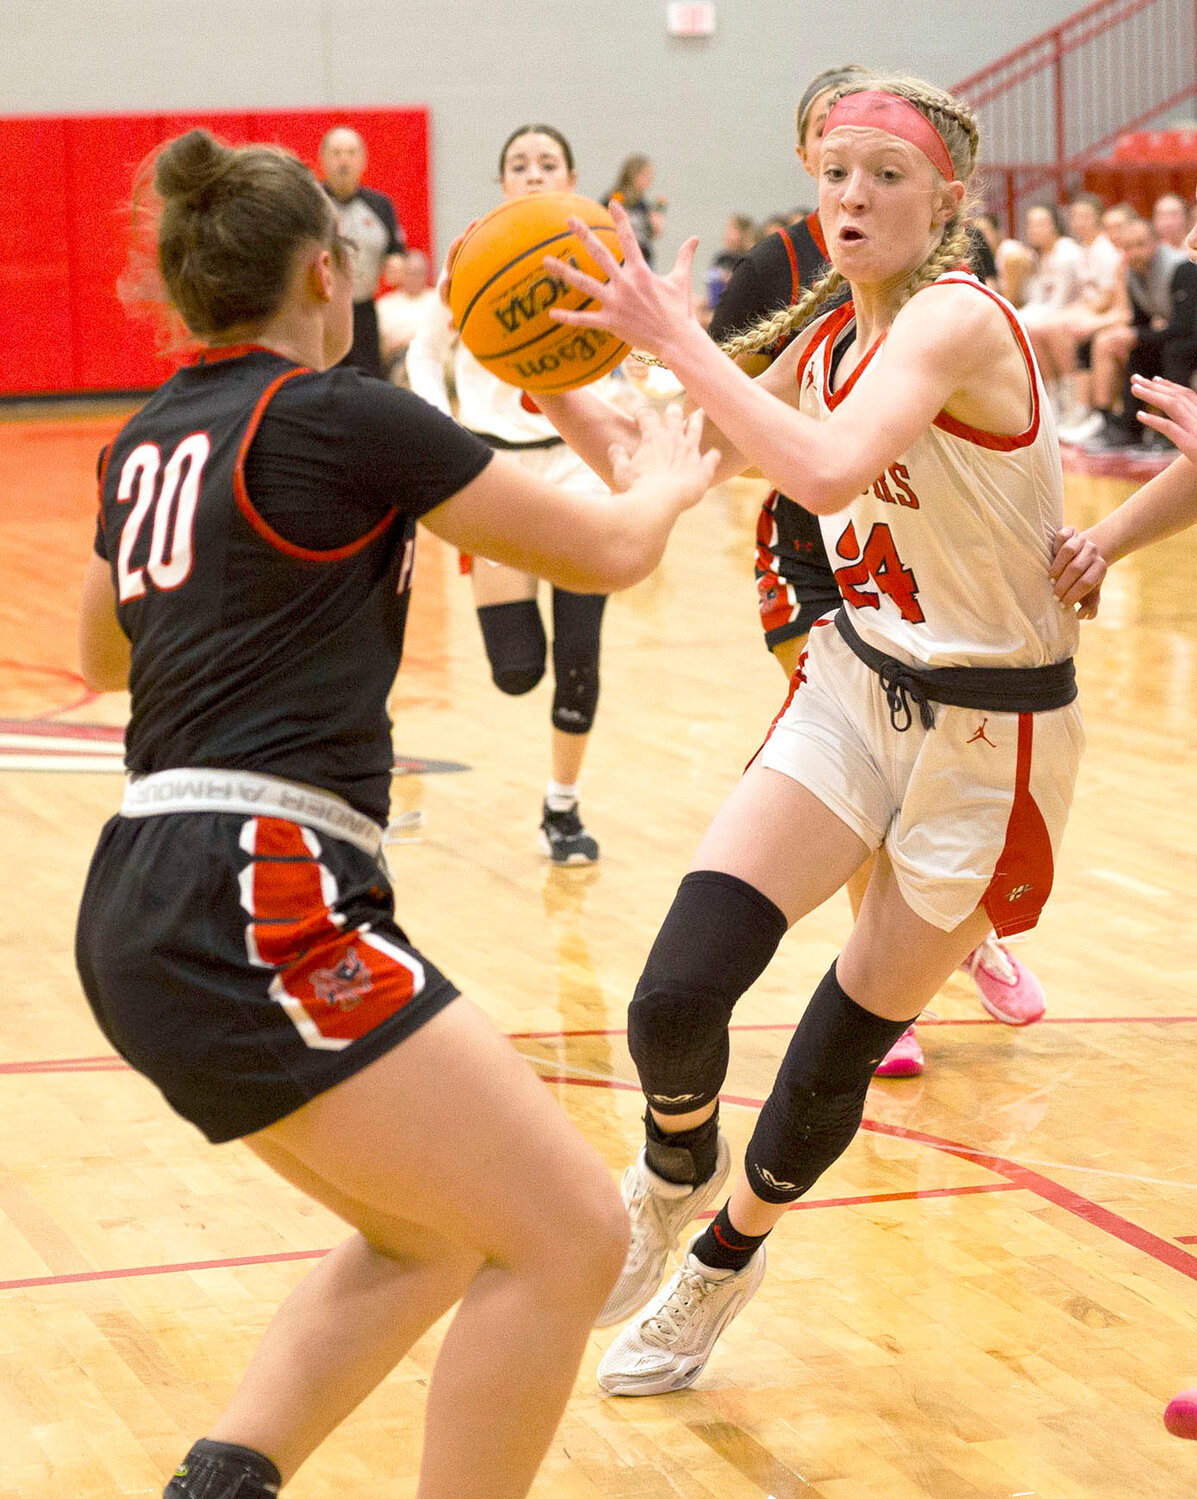 Washington sophomore Preslee Johnson slices through the lane during the Warriors’ 39-27 win over Pauls Valley. Johnson had a game-high 19 points.